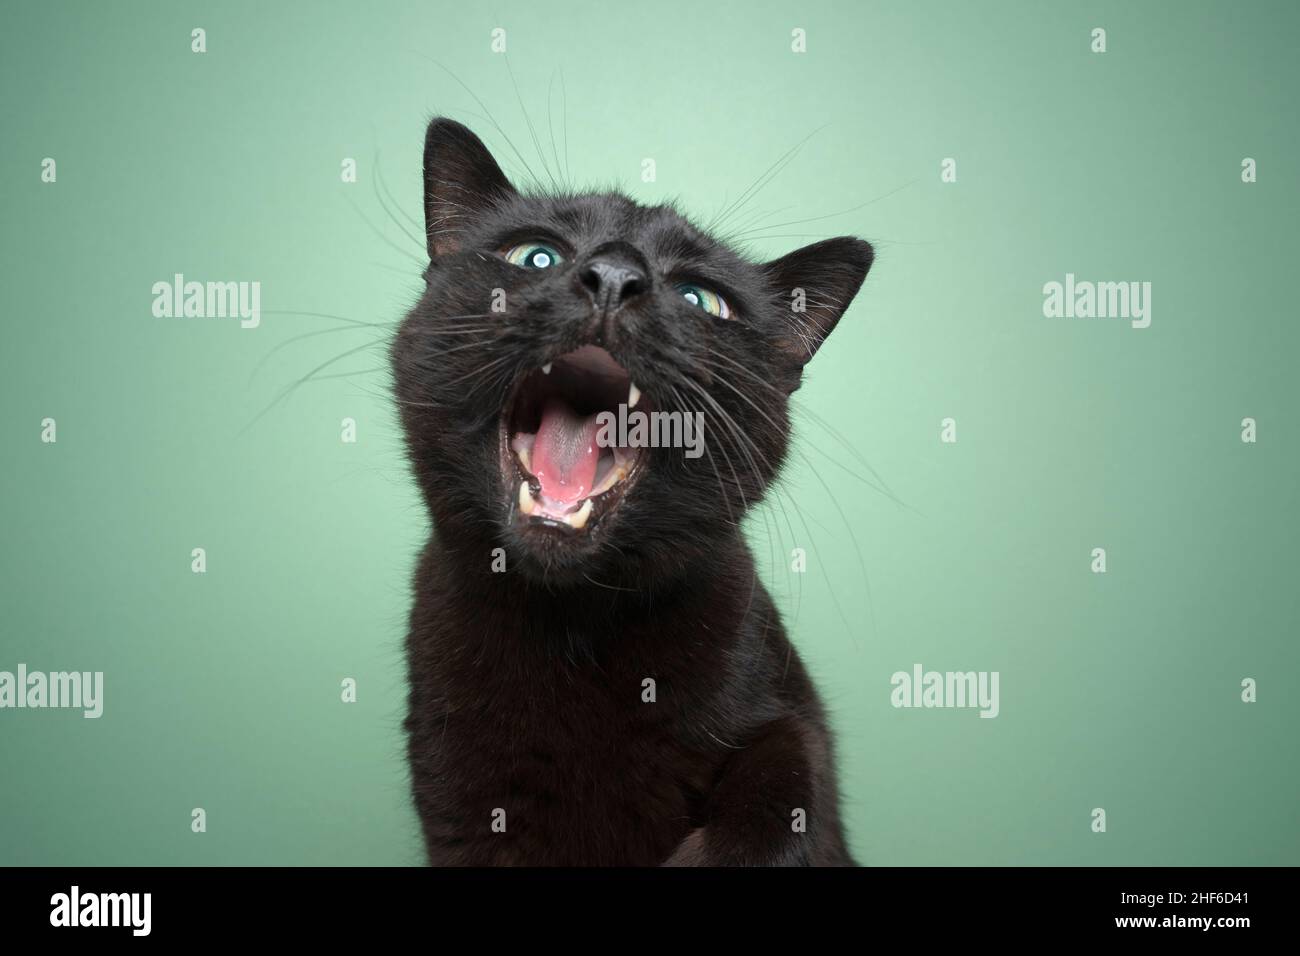 black cat with mouth wide open funny portrait on mint green background with copy space Stock Photo